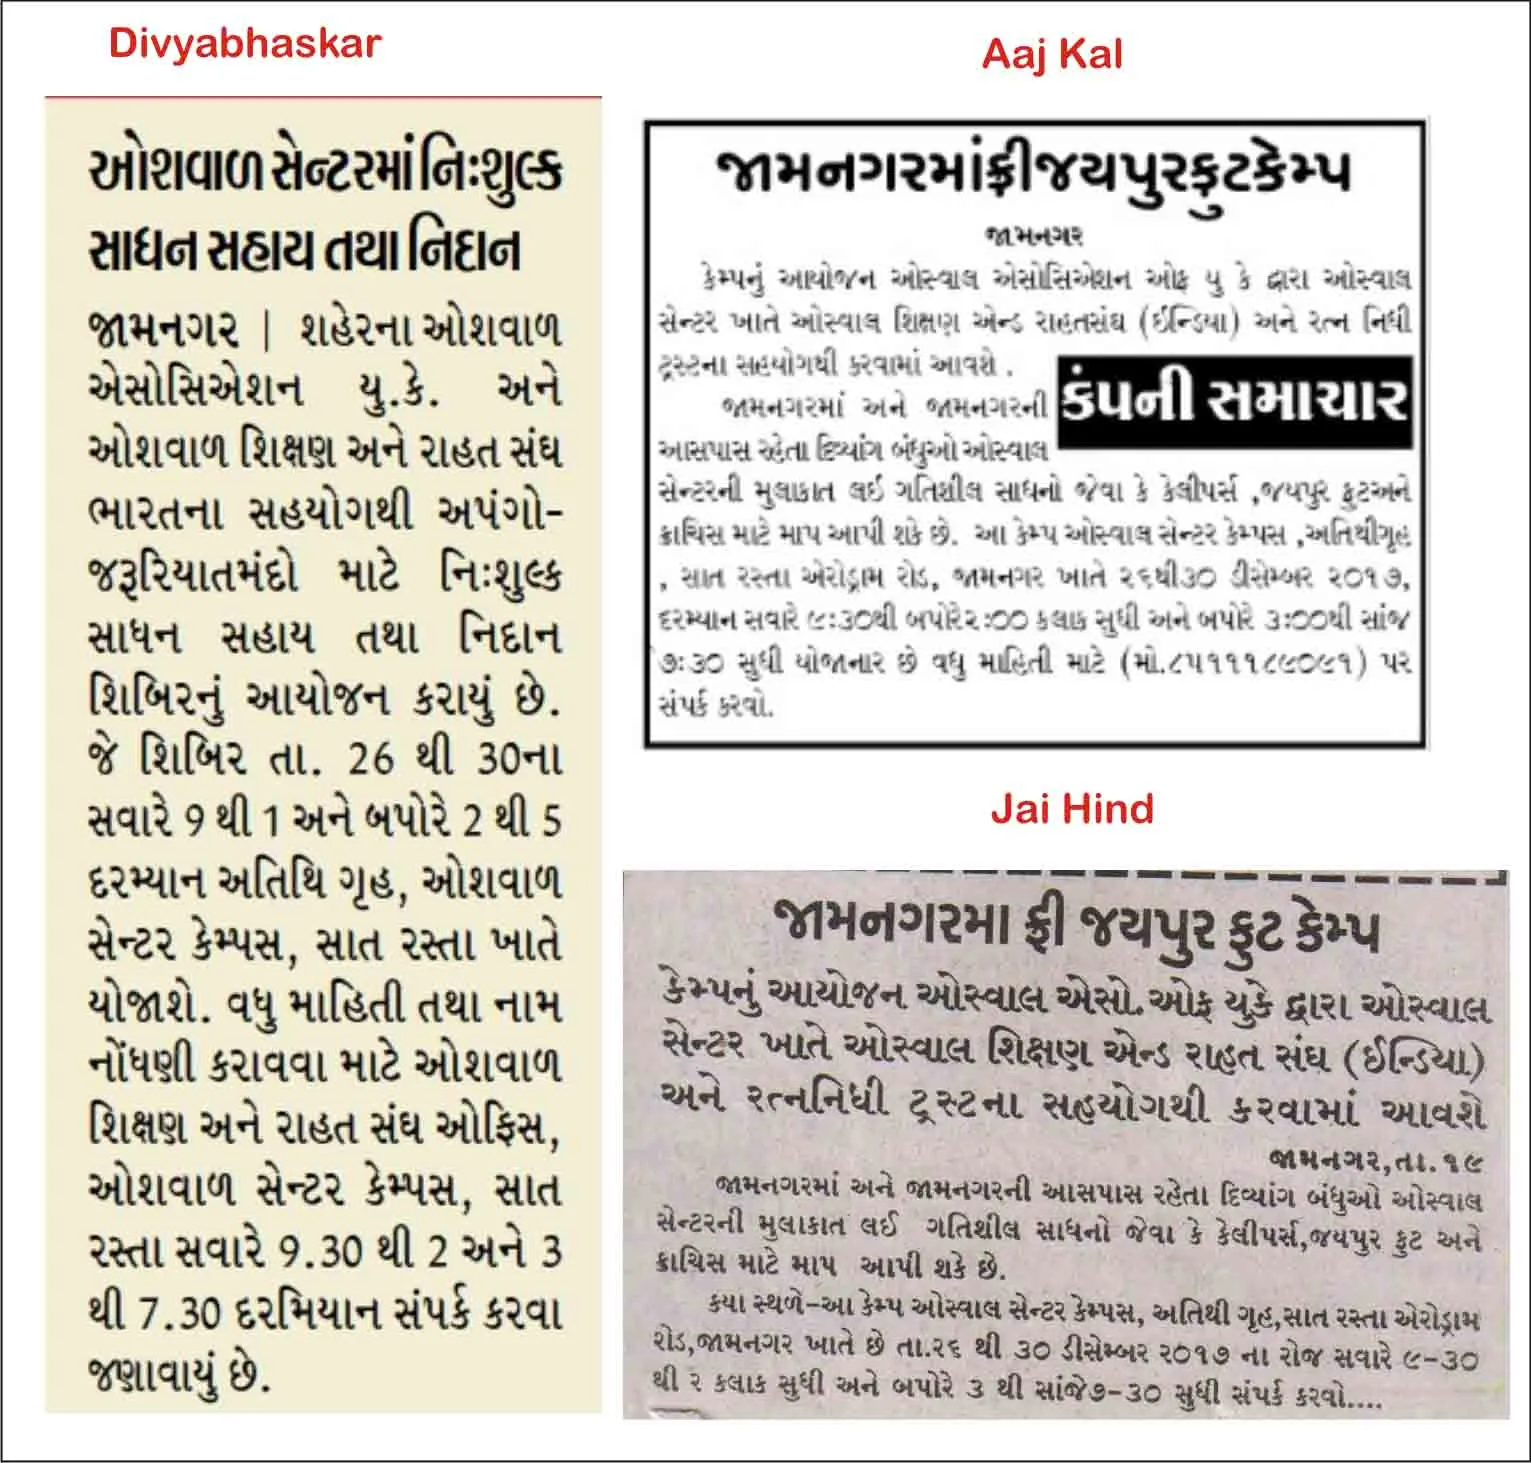 Articles About Jamnagar Oswal Jaipur Foot Camp in Newspapers